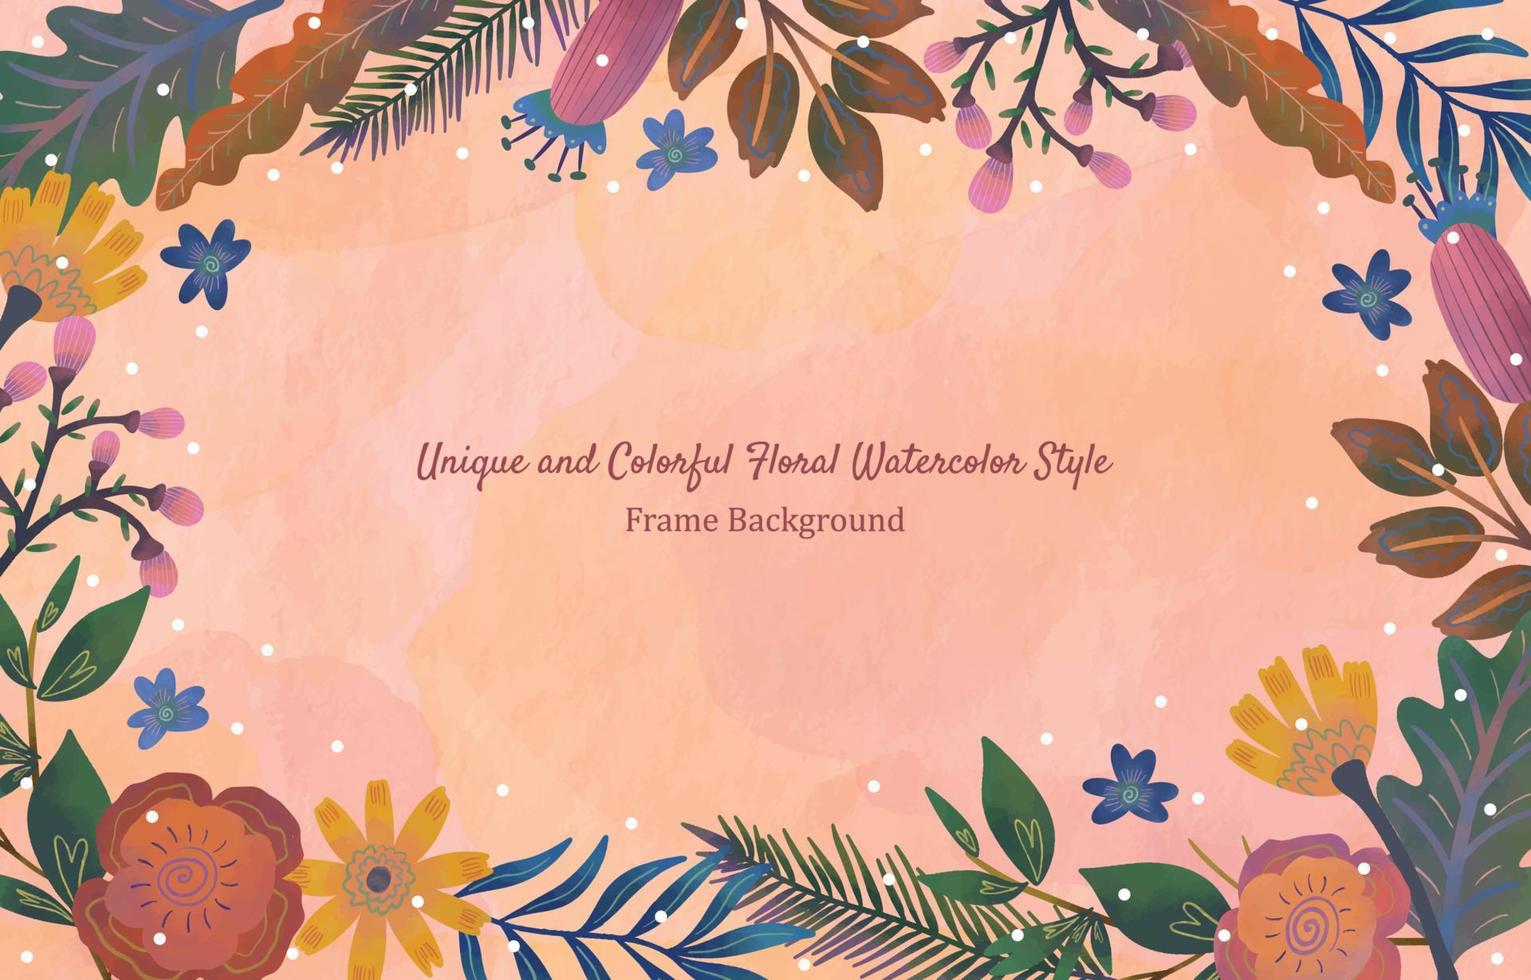 Unique and Colorful Floral Watercolor Style Frame Background vector